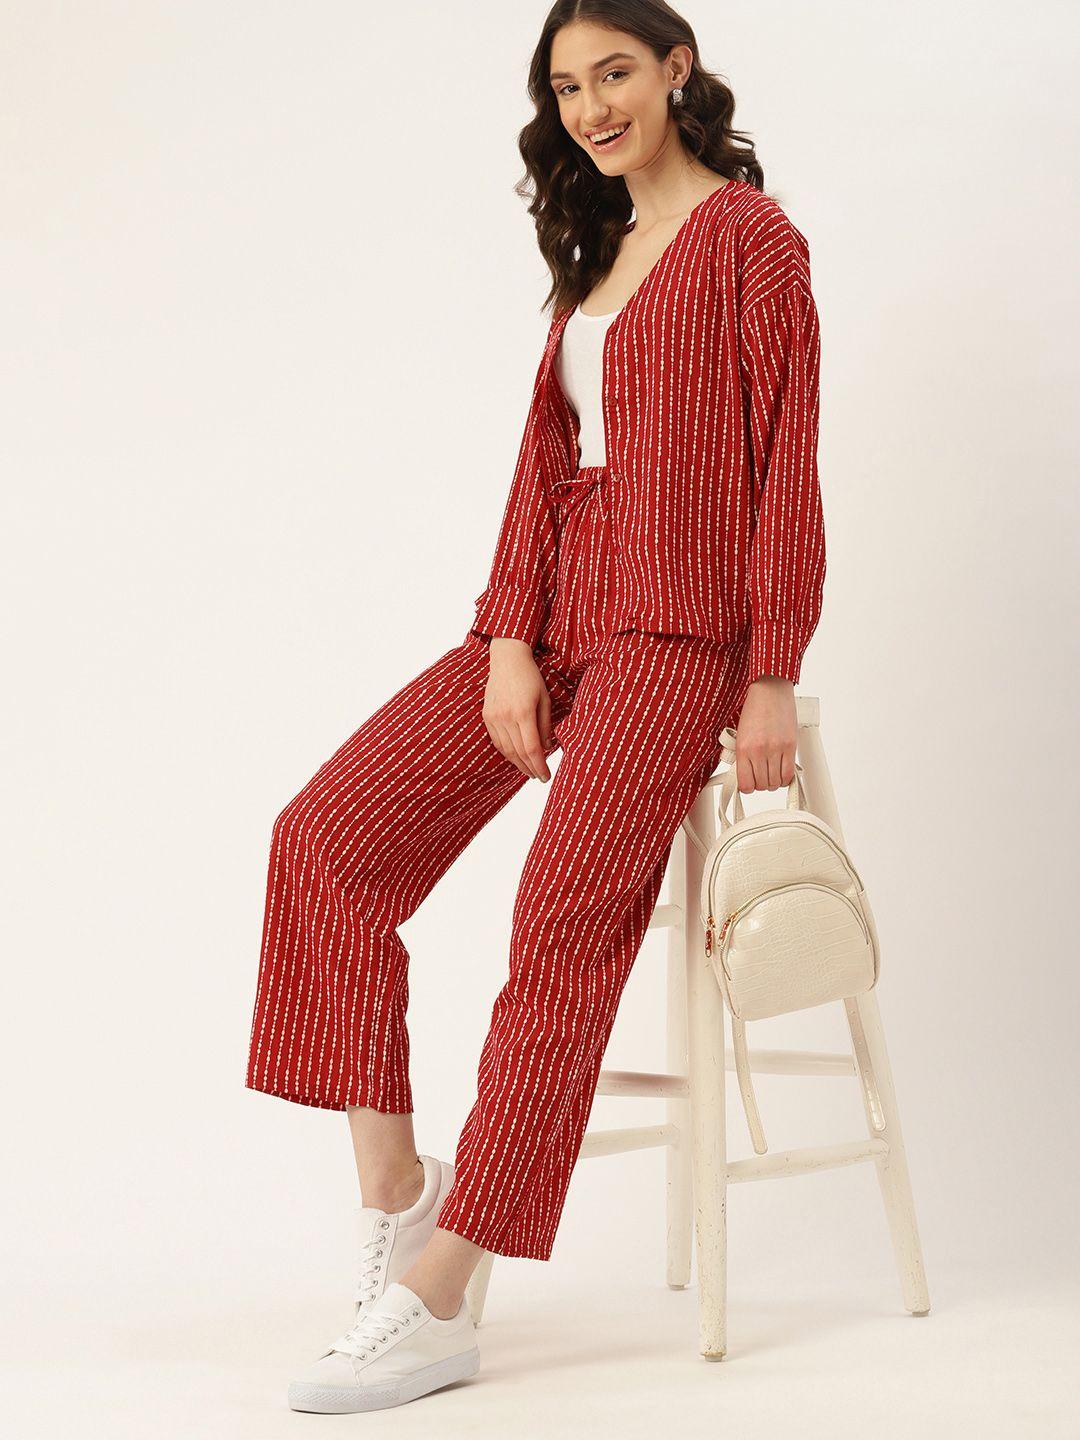 dressberry striped shirt with trousers